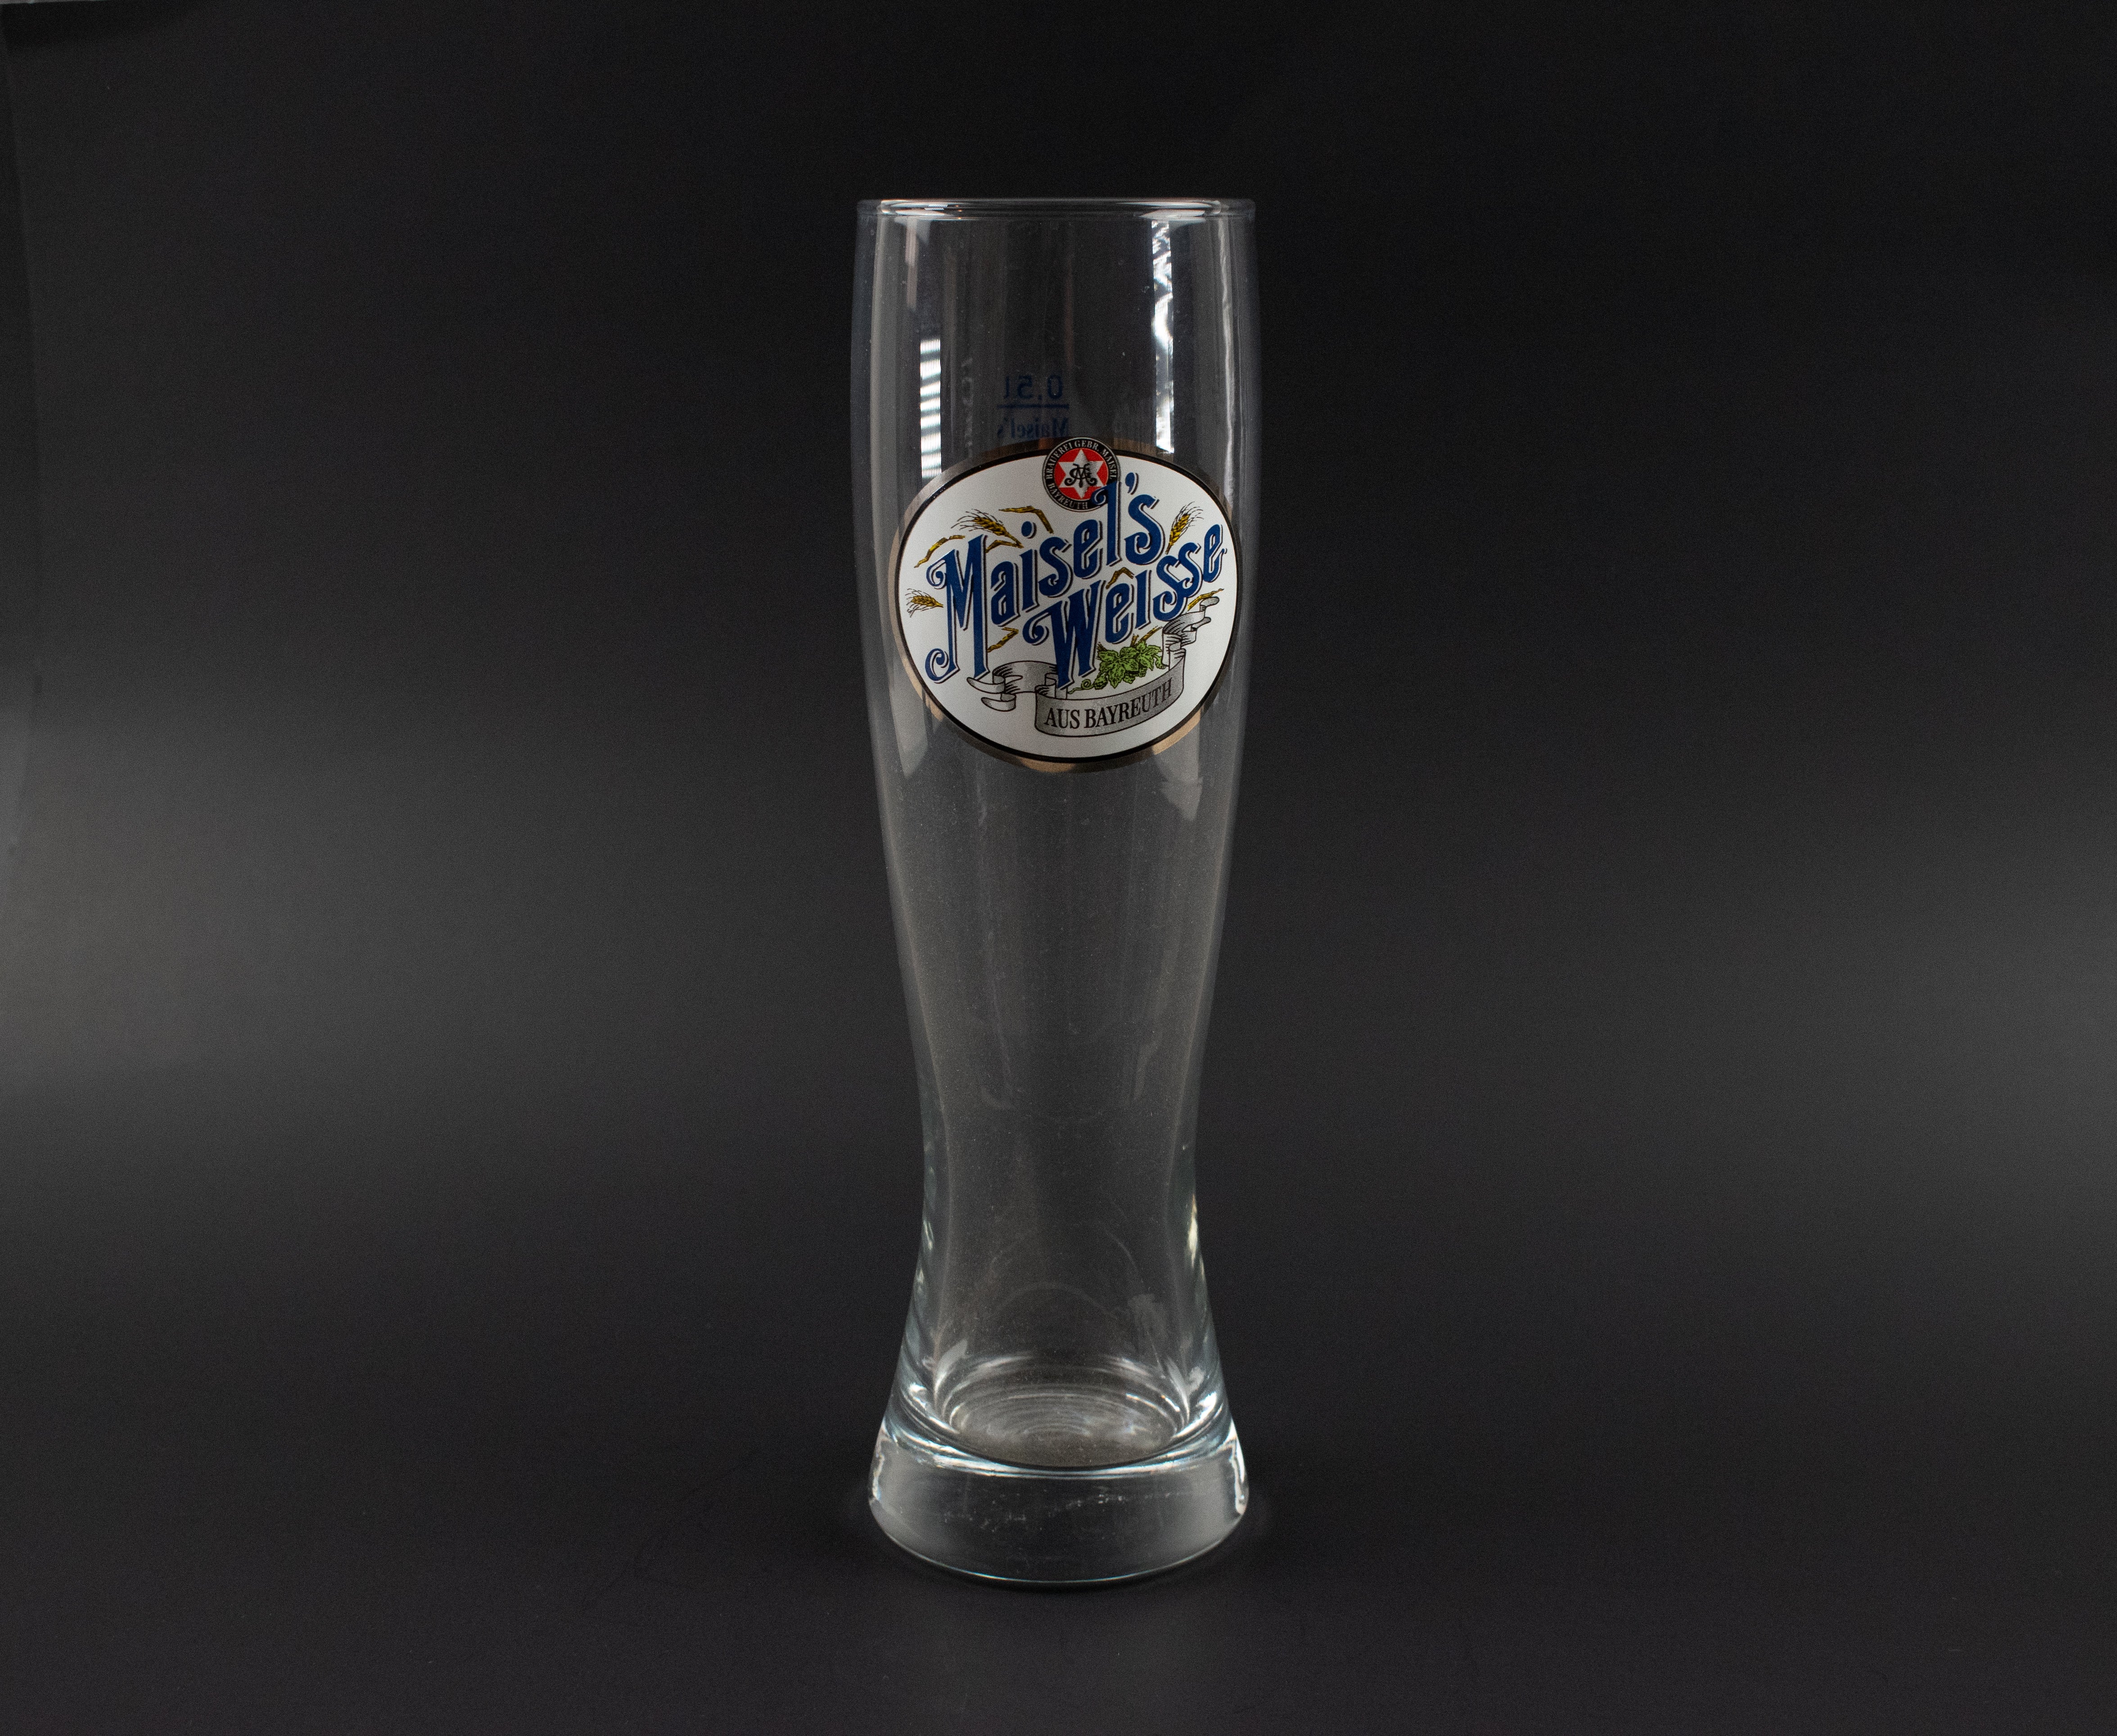 Maisels Weisse Aus Bayreuth 10 Inch Tall Glass 0,5L Pilsner Beer Glass Used